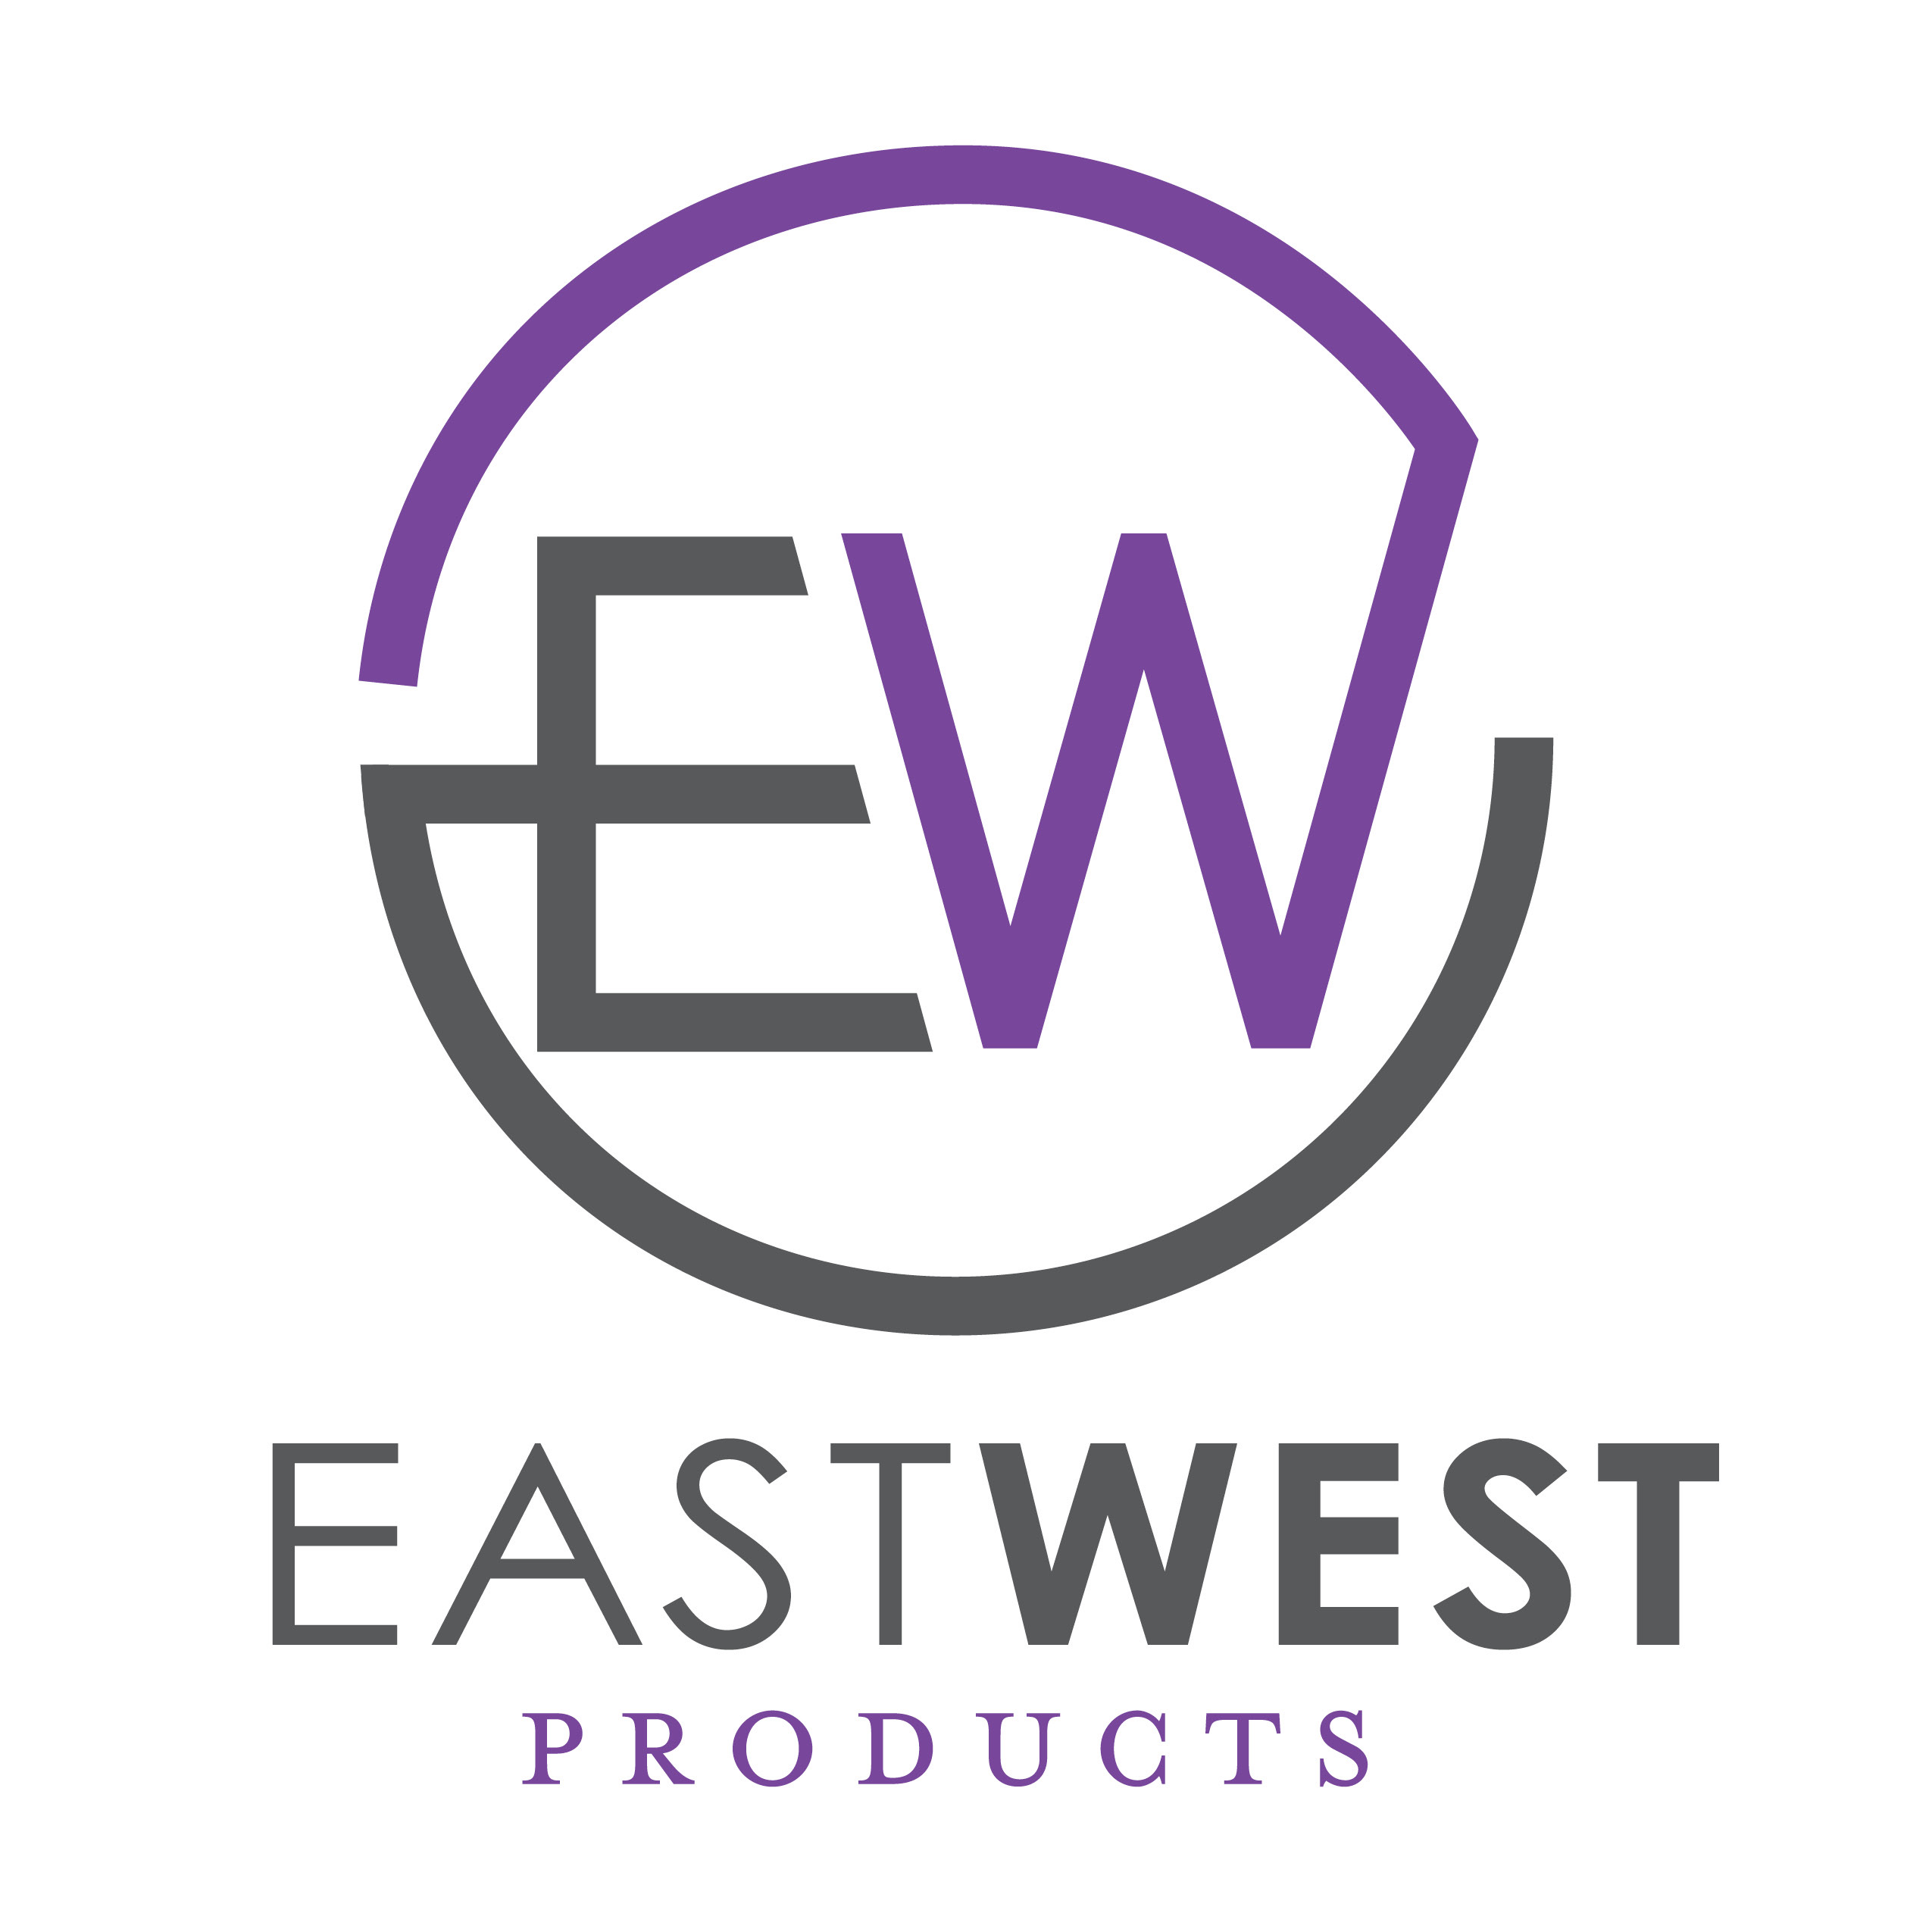 EastWest Products